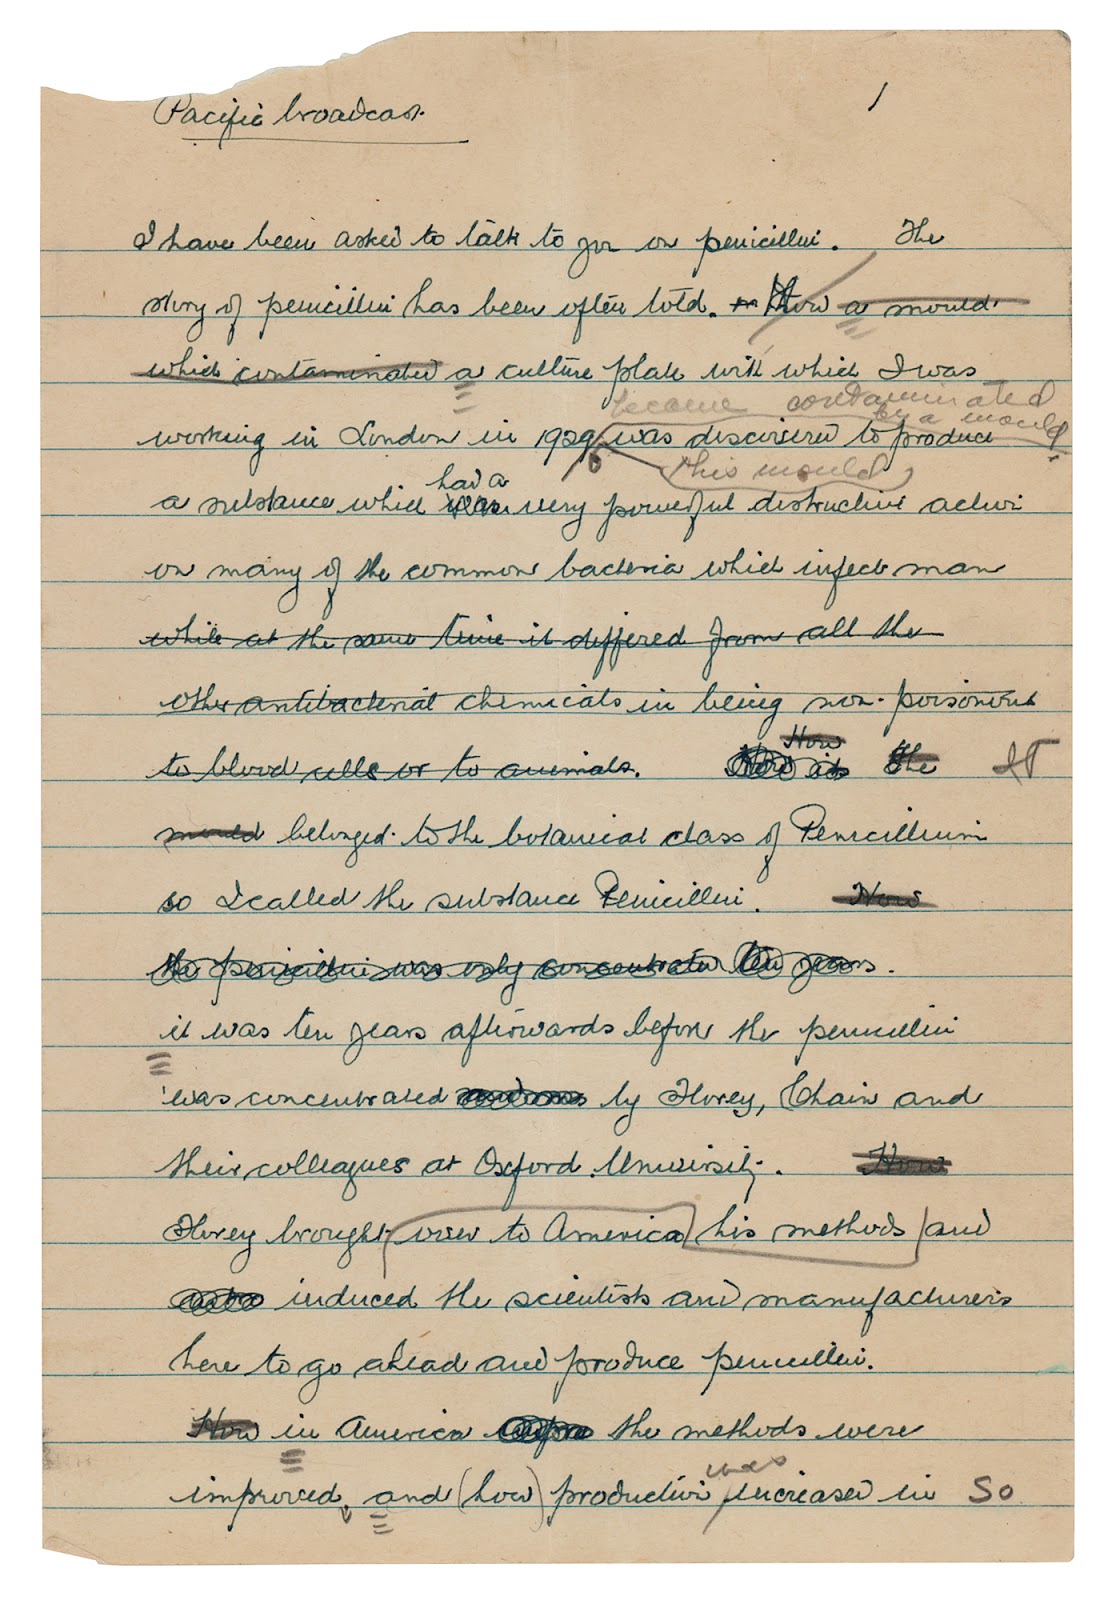 The first page of Alexander Fleming’s lengthy 10-page manuscript about the uses of penicillin. This lot sold for $46,955.